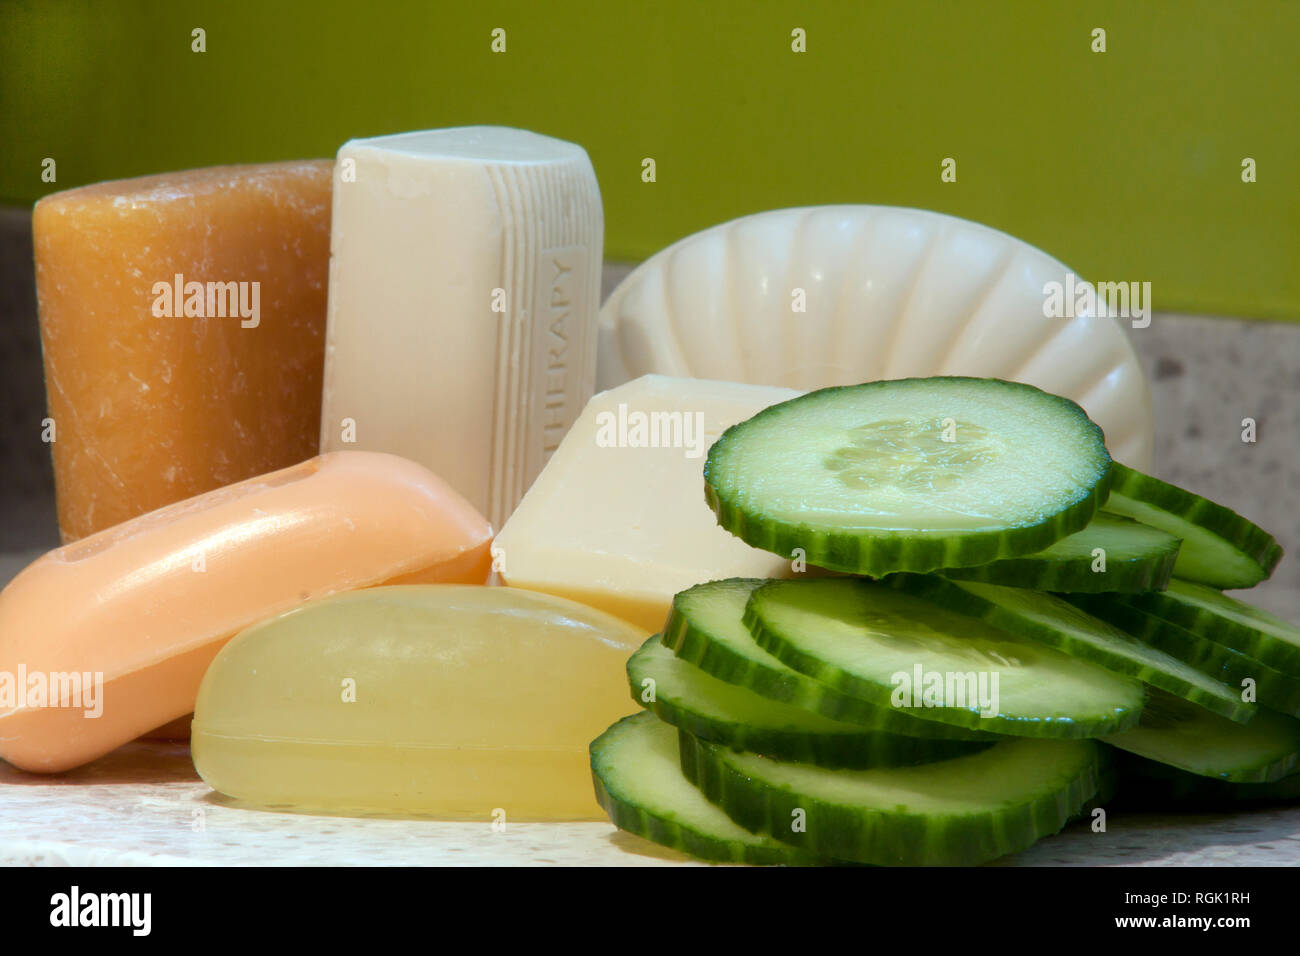 variety of natural soaps and sliced cucumber Stock Photo